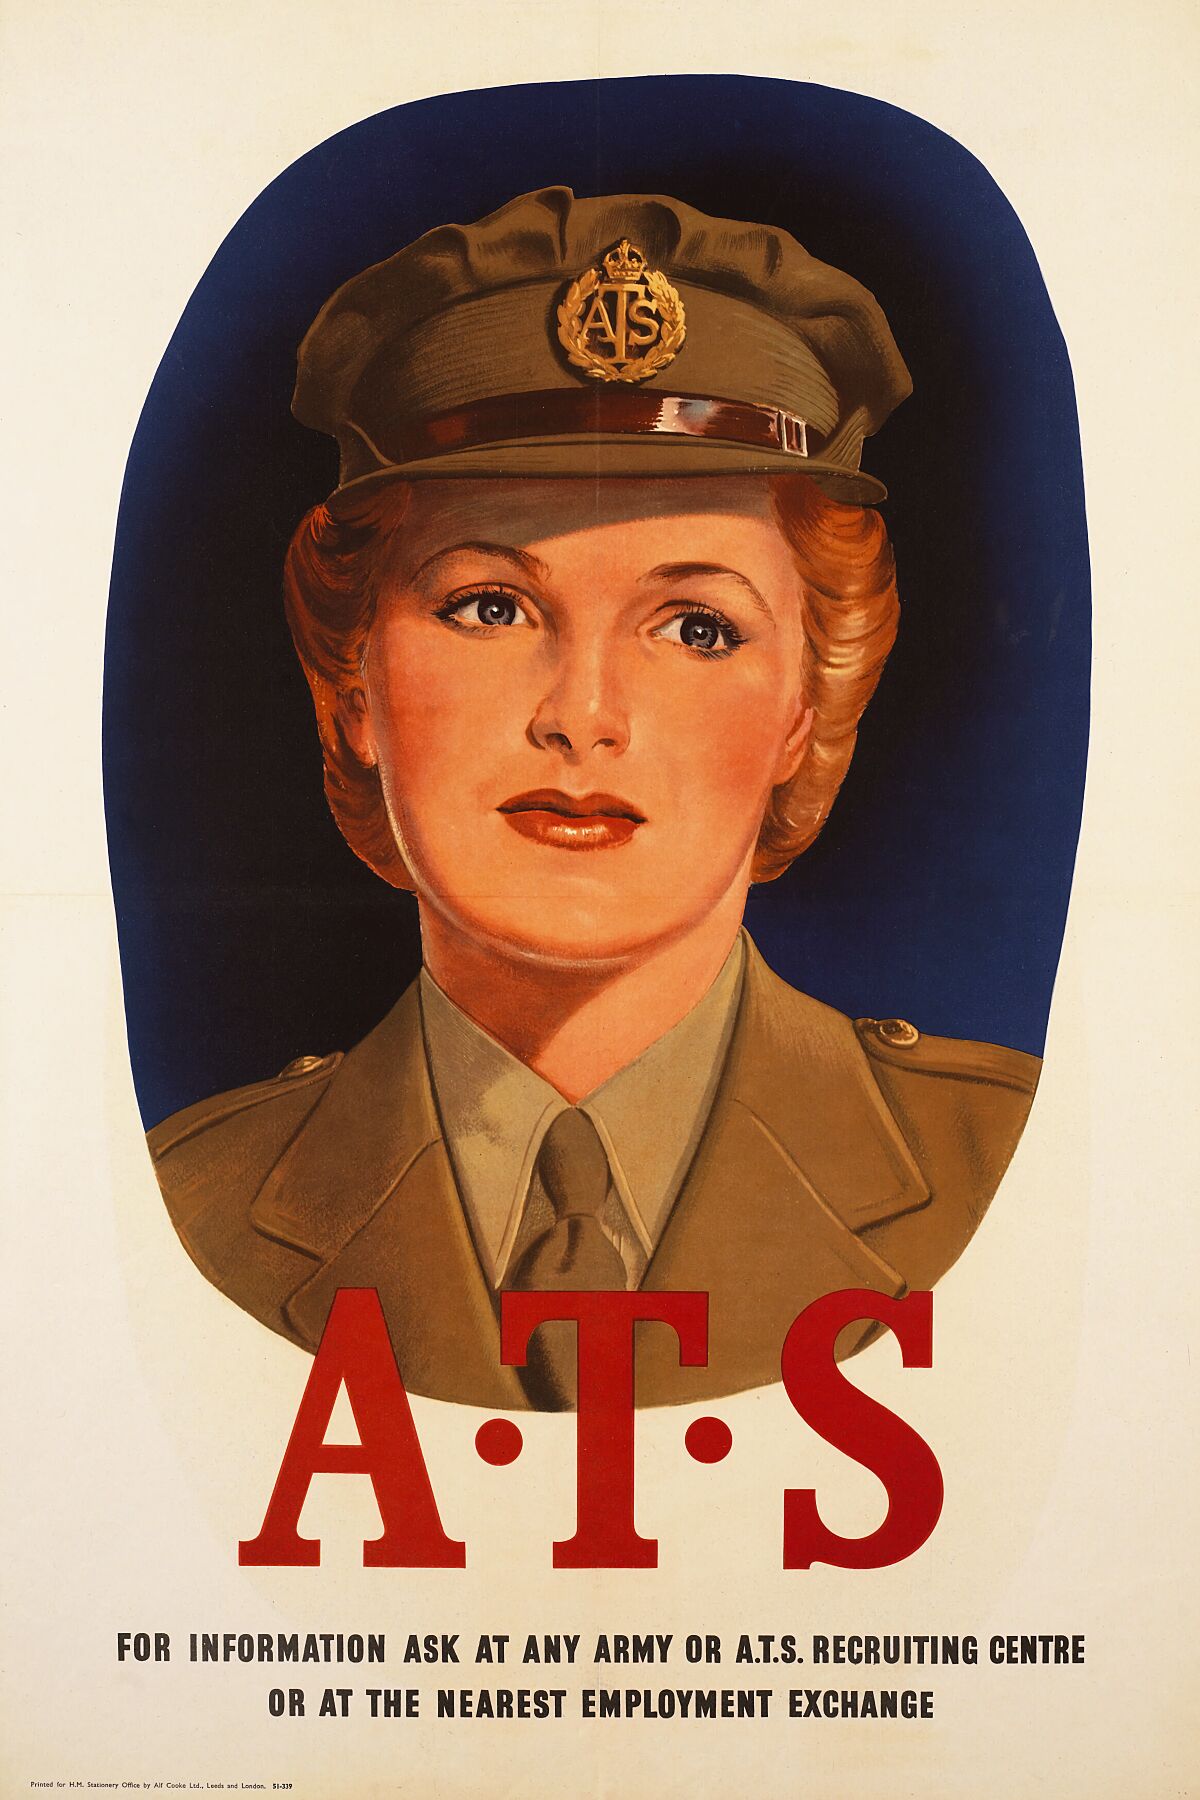 Joins The ATS in WW2 - 1940s